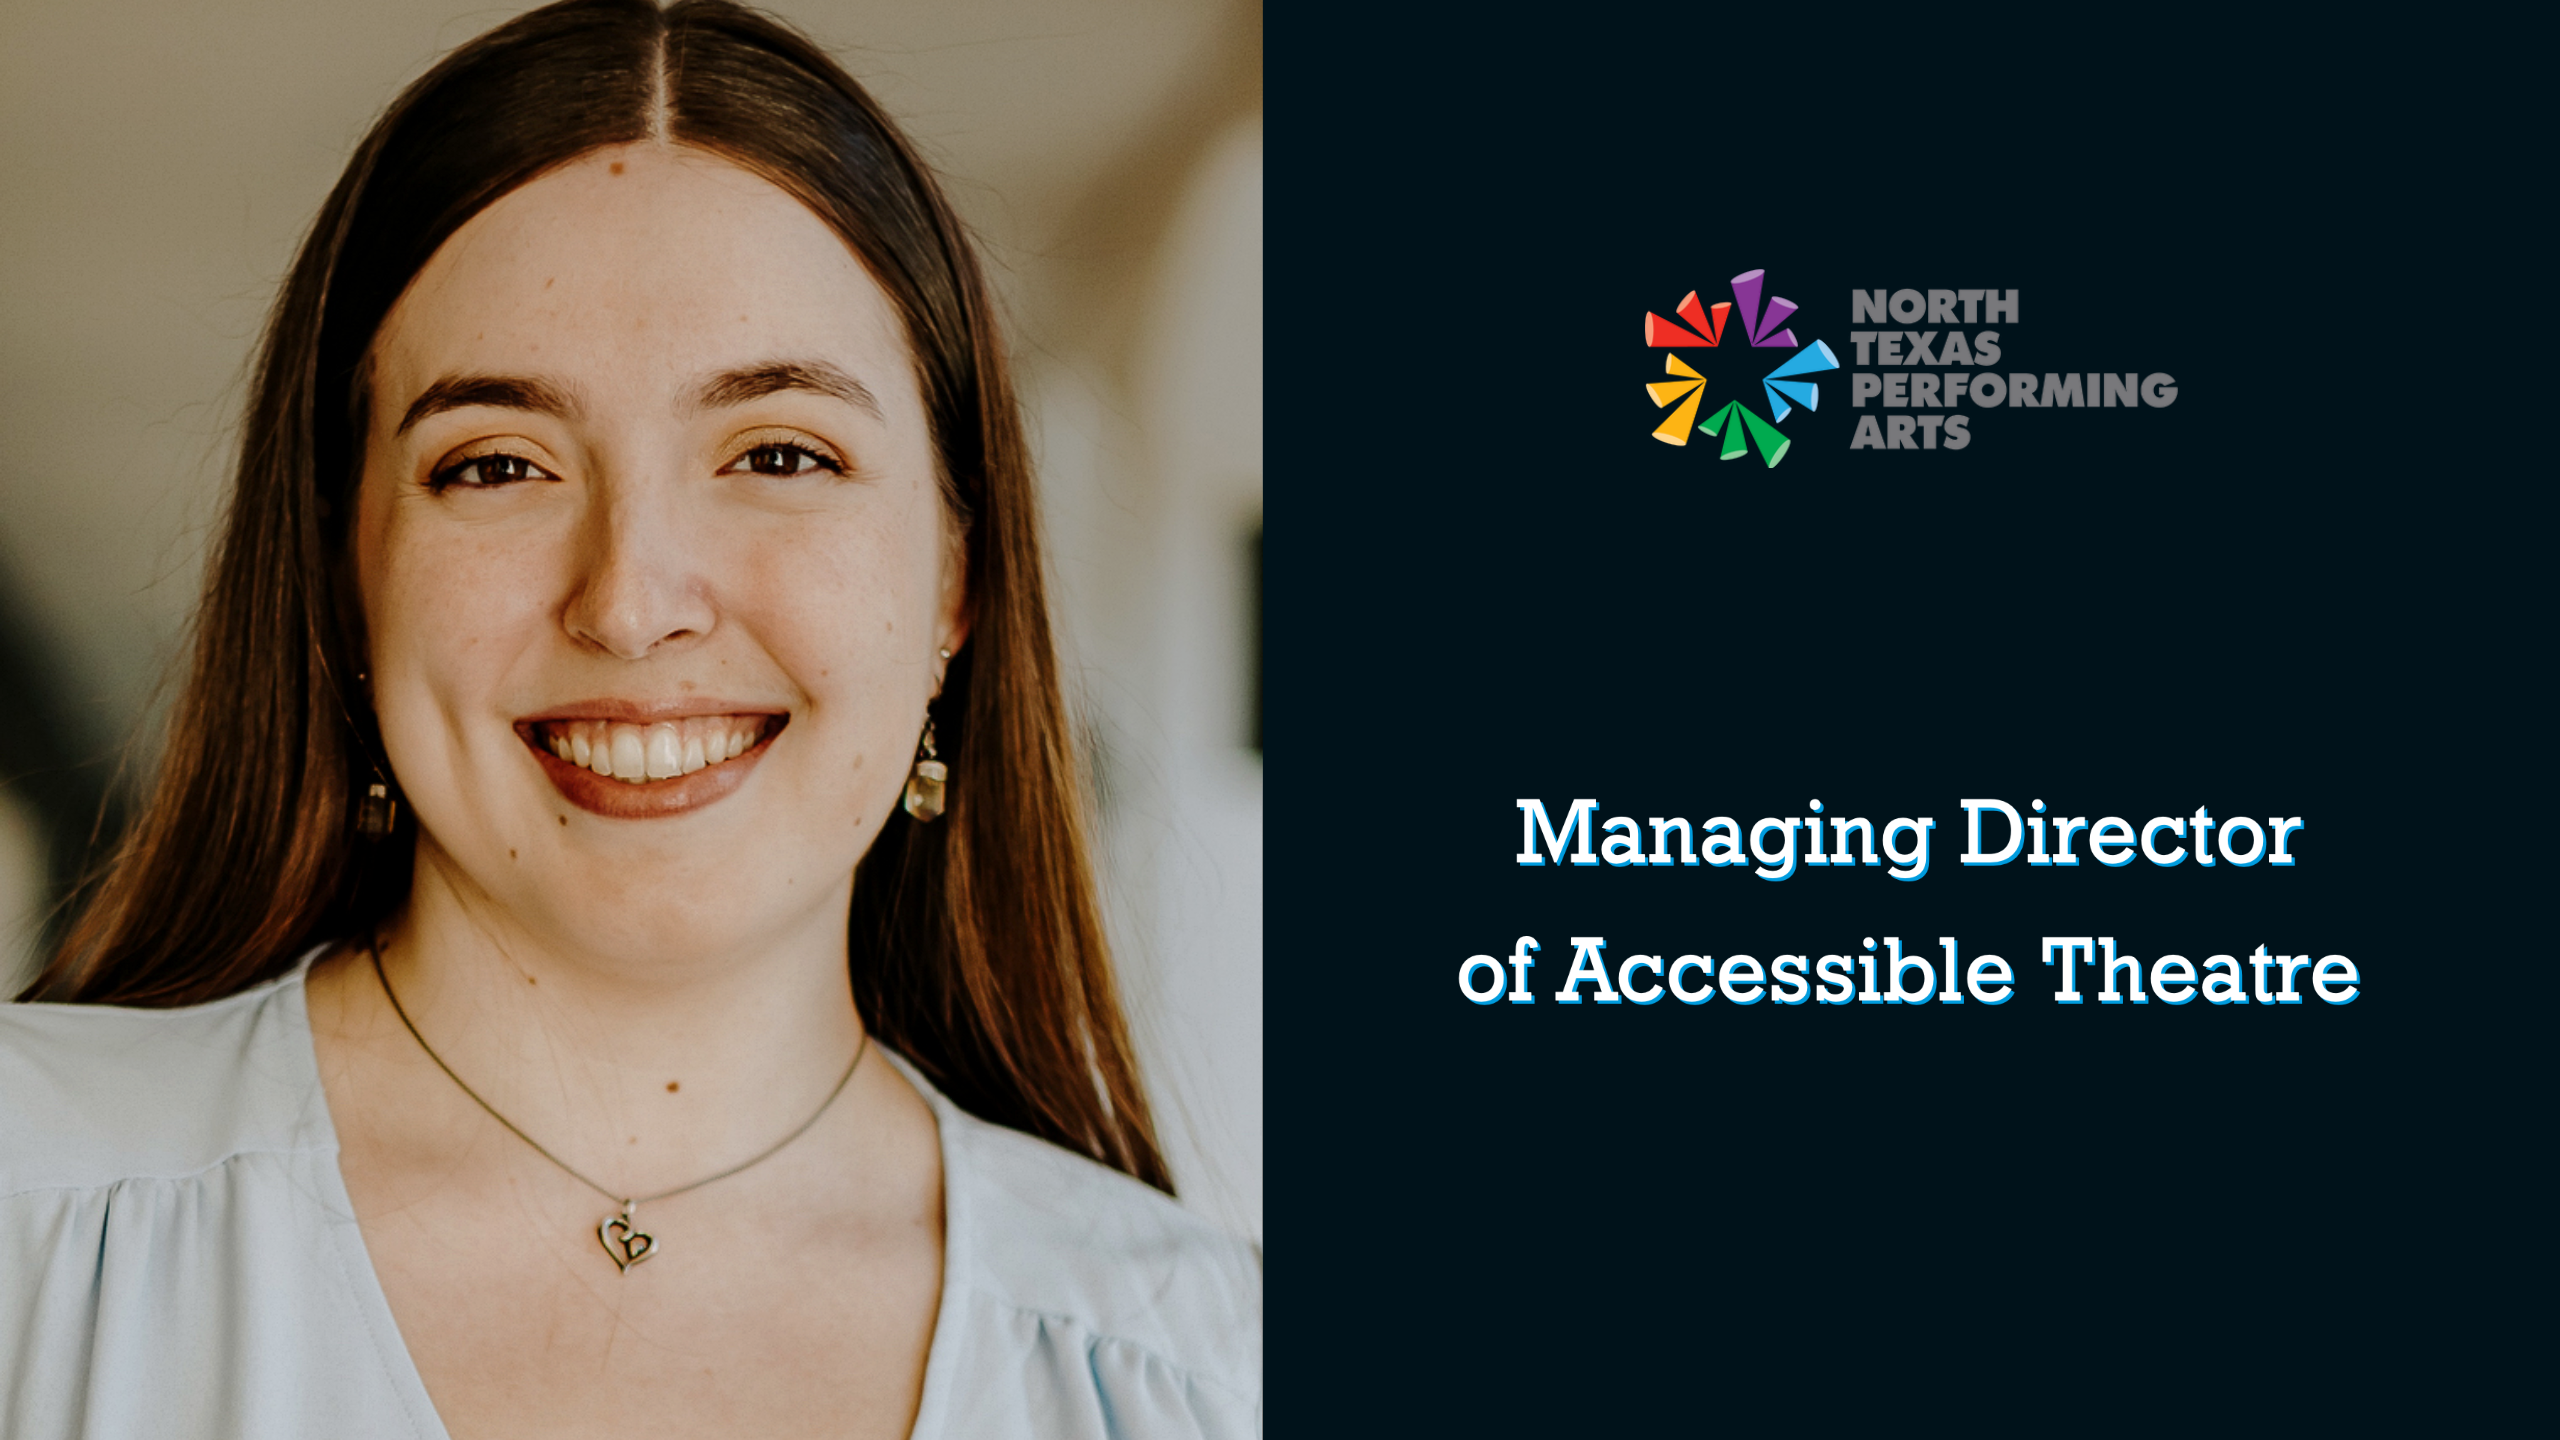 Gabrielle Collins Announced as Managing Director of Accessible Theatre